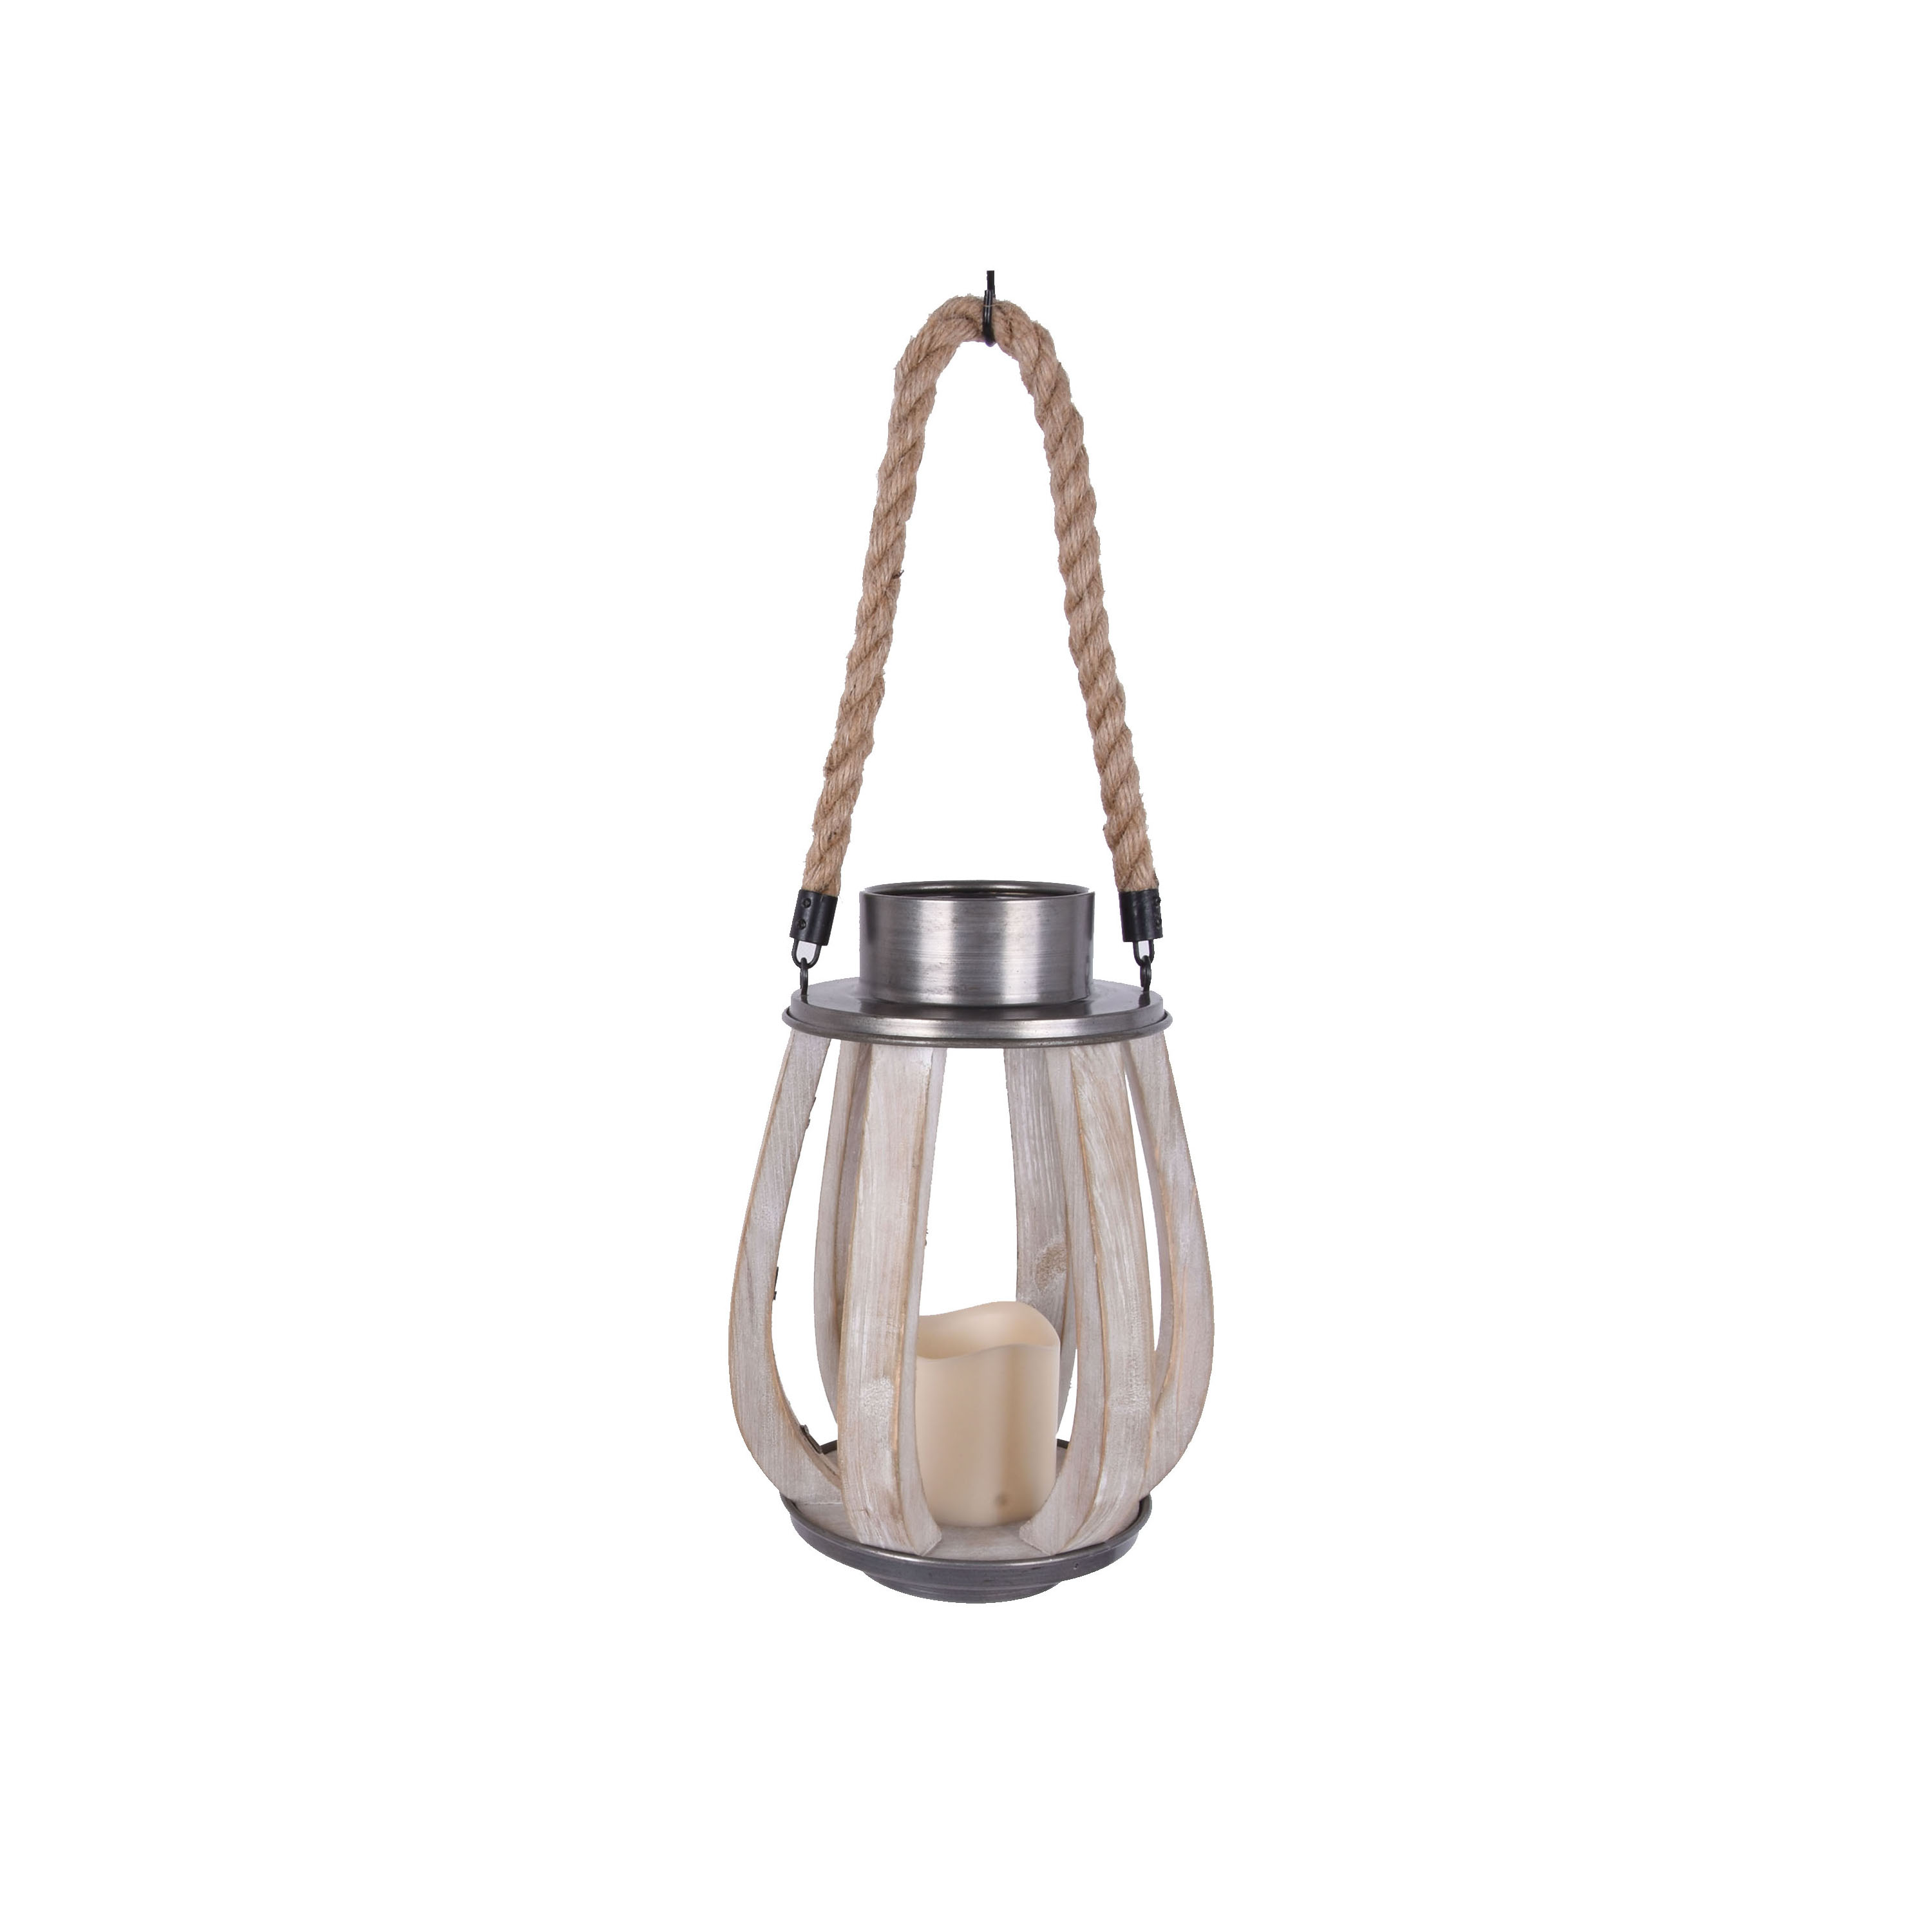 Better Homes & Gardens Medium Battery Operated Classic LED Wood Lantern, Natural Finish - image 3 of 9